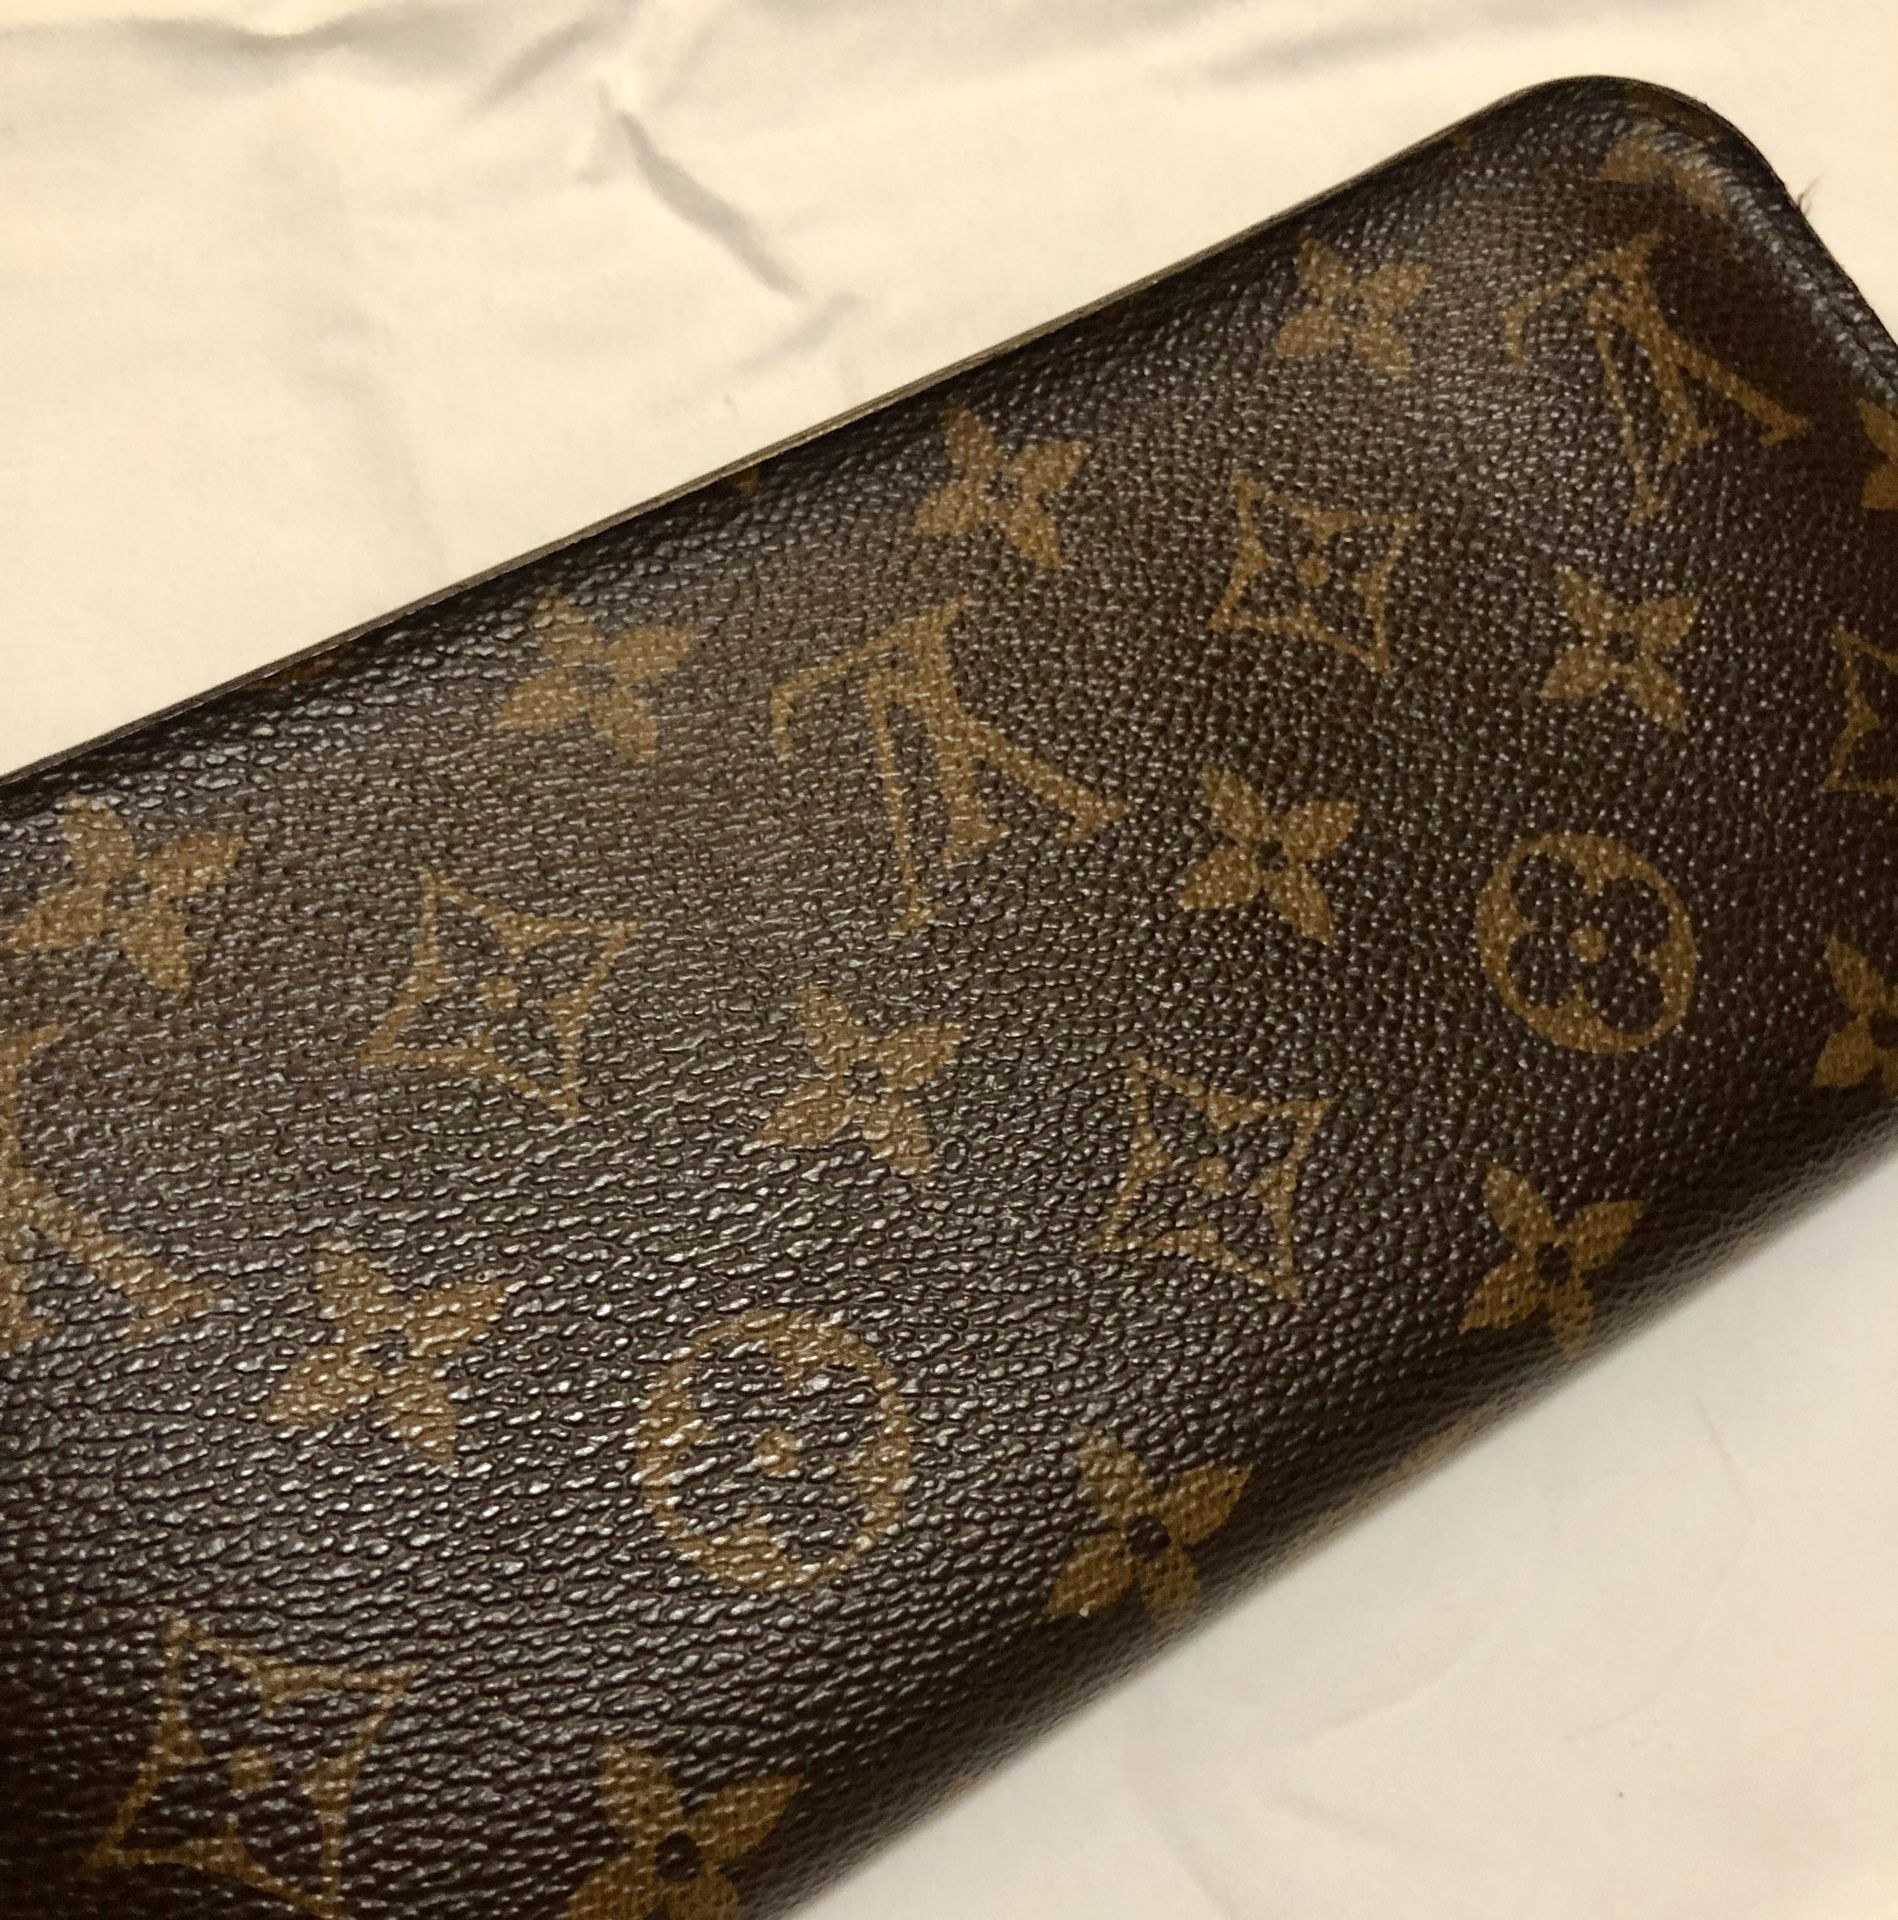 NBA X LOUIS VUITTON WALLET for Sale in Pearland, TX - OfferUp